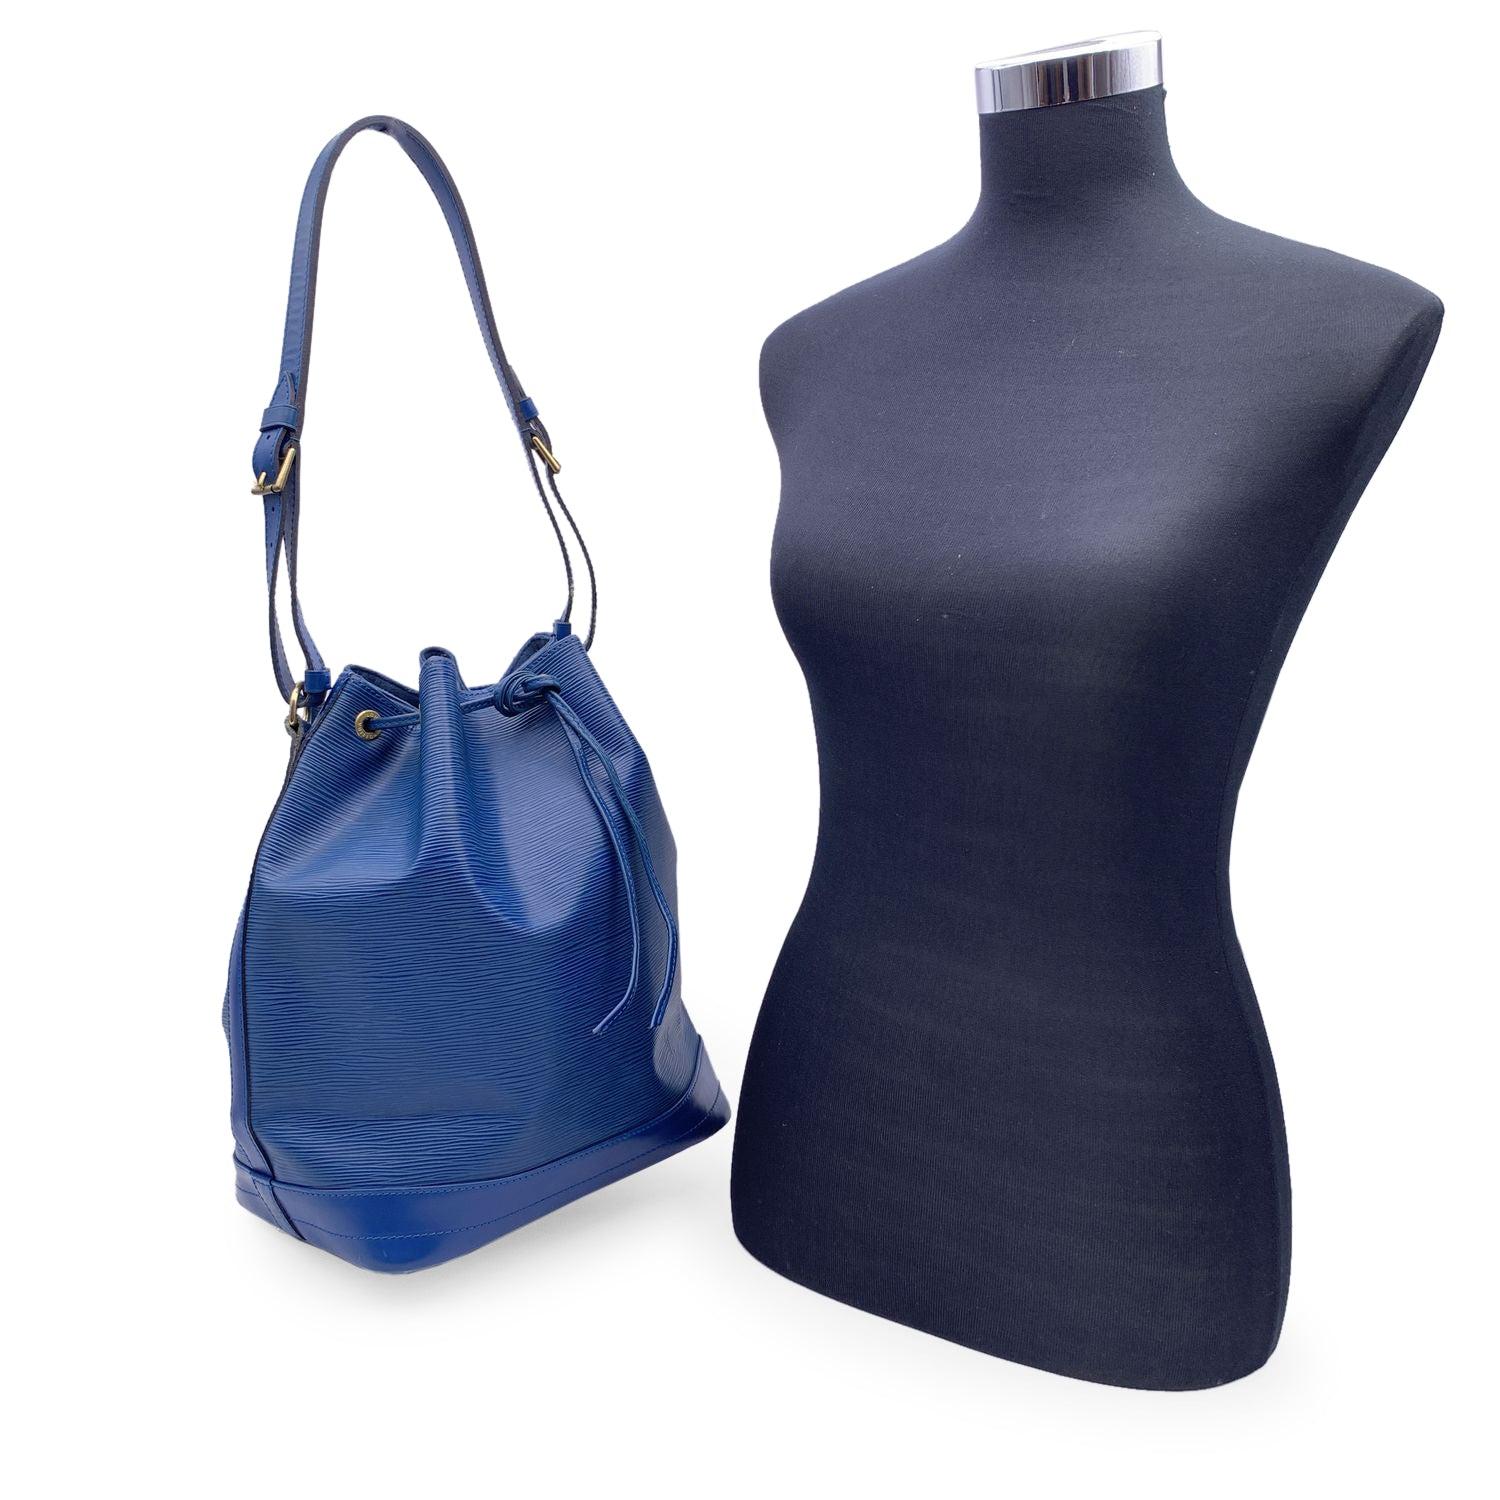 Iconic 'Noé' bucket bag by LOUIS VUITTON was first created in 1932 to carry champagne bottles. Blue Epi leather with smooth leather trim at the bottom, with drawstring closure and microfiber lining. 1 D-Ring inside, Adjustable shoulder strap. LV -